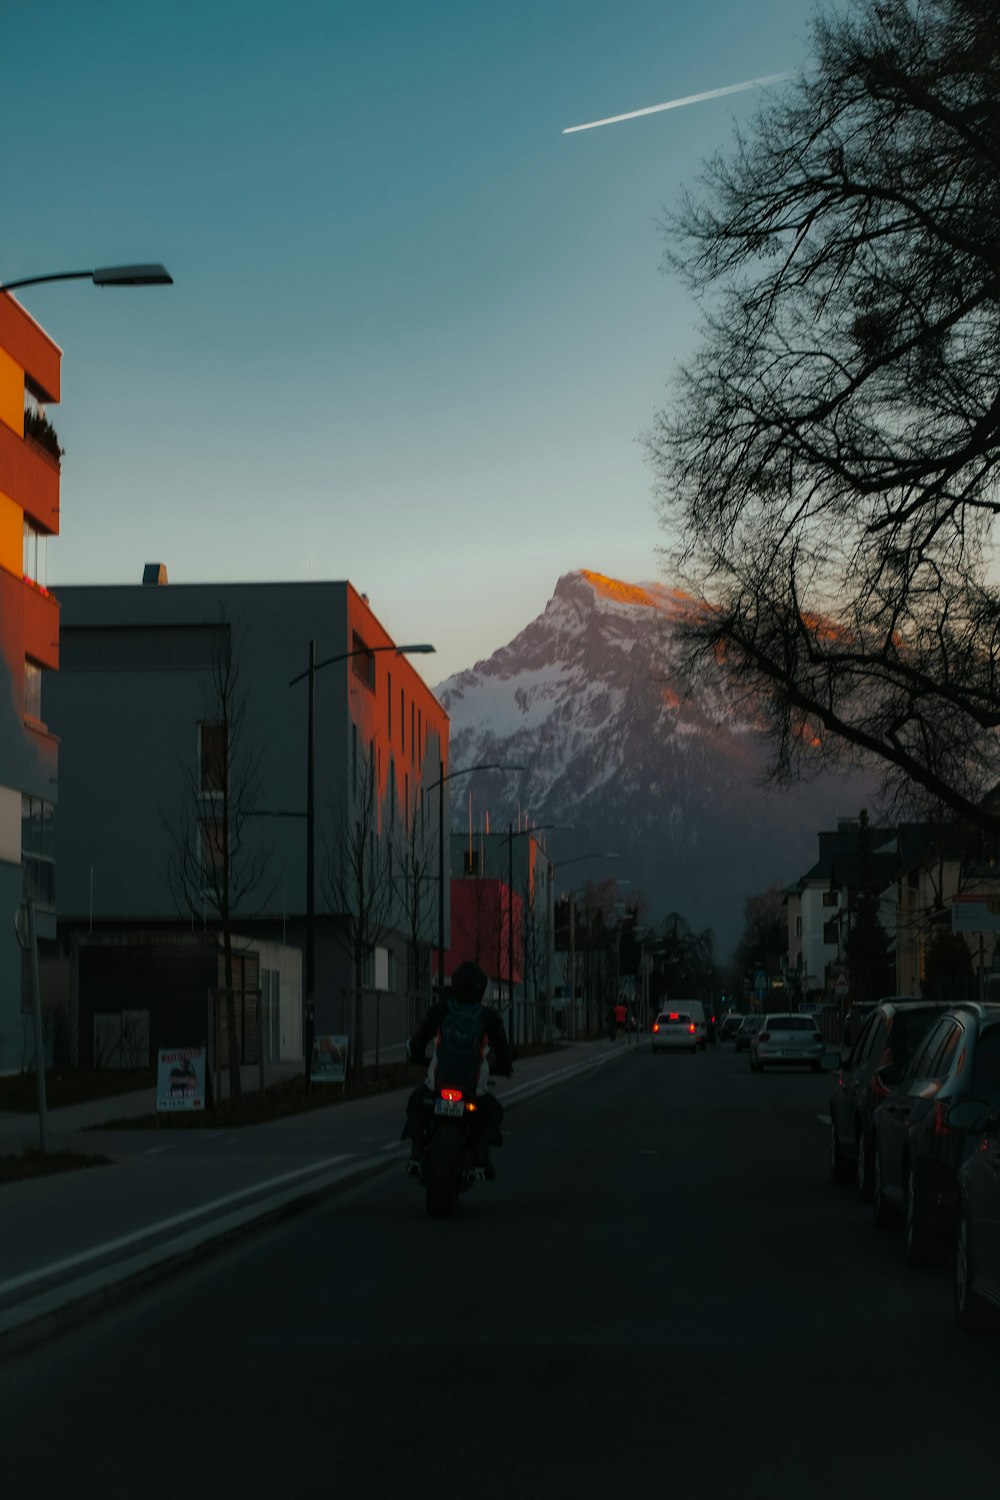 a person riding a motorcycle on a street with buildings and a mountain in the background